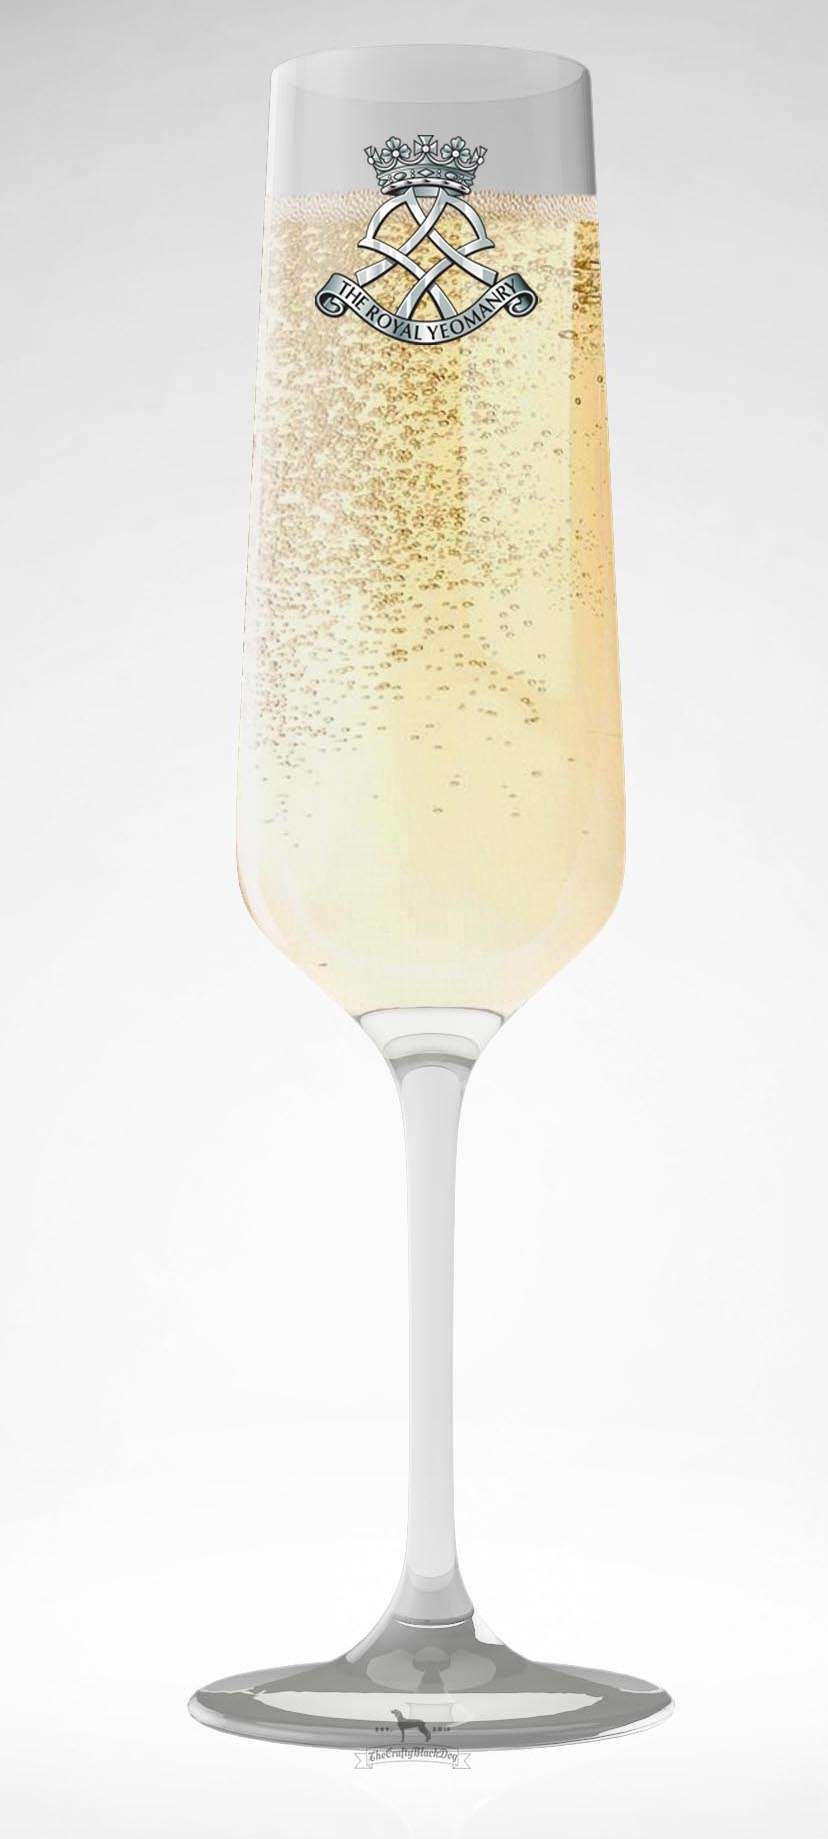 The Royal Yeomanry - Champagne/Prosecco Flutes